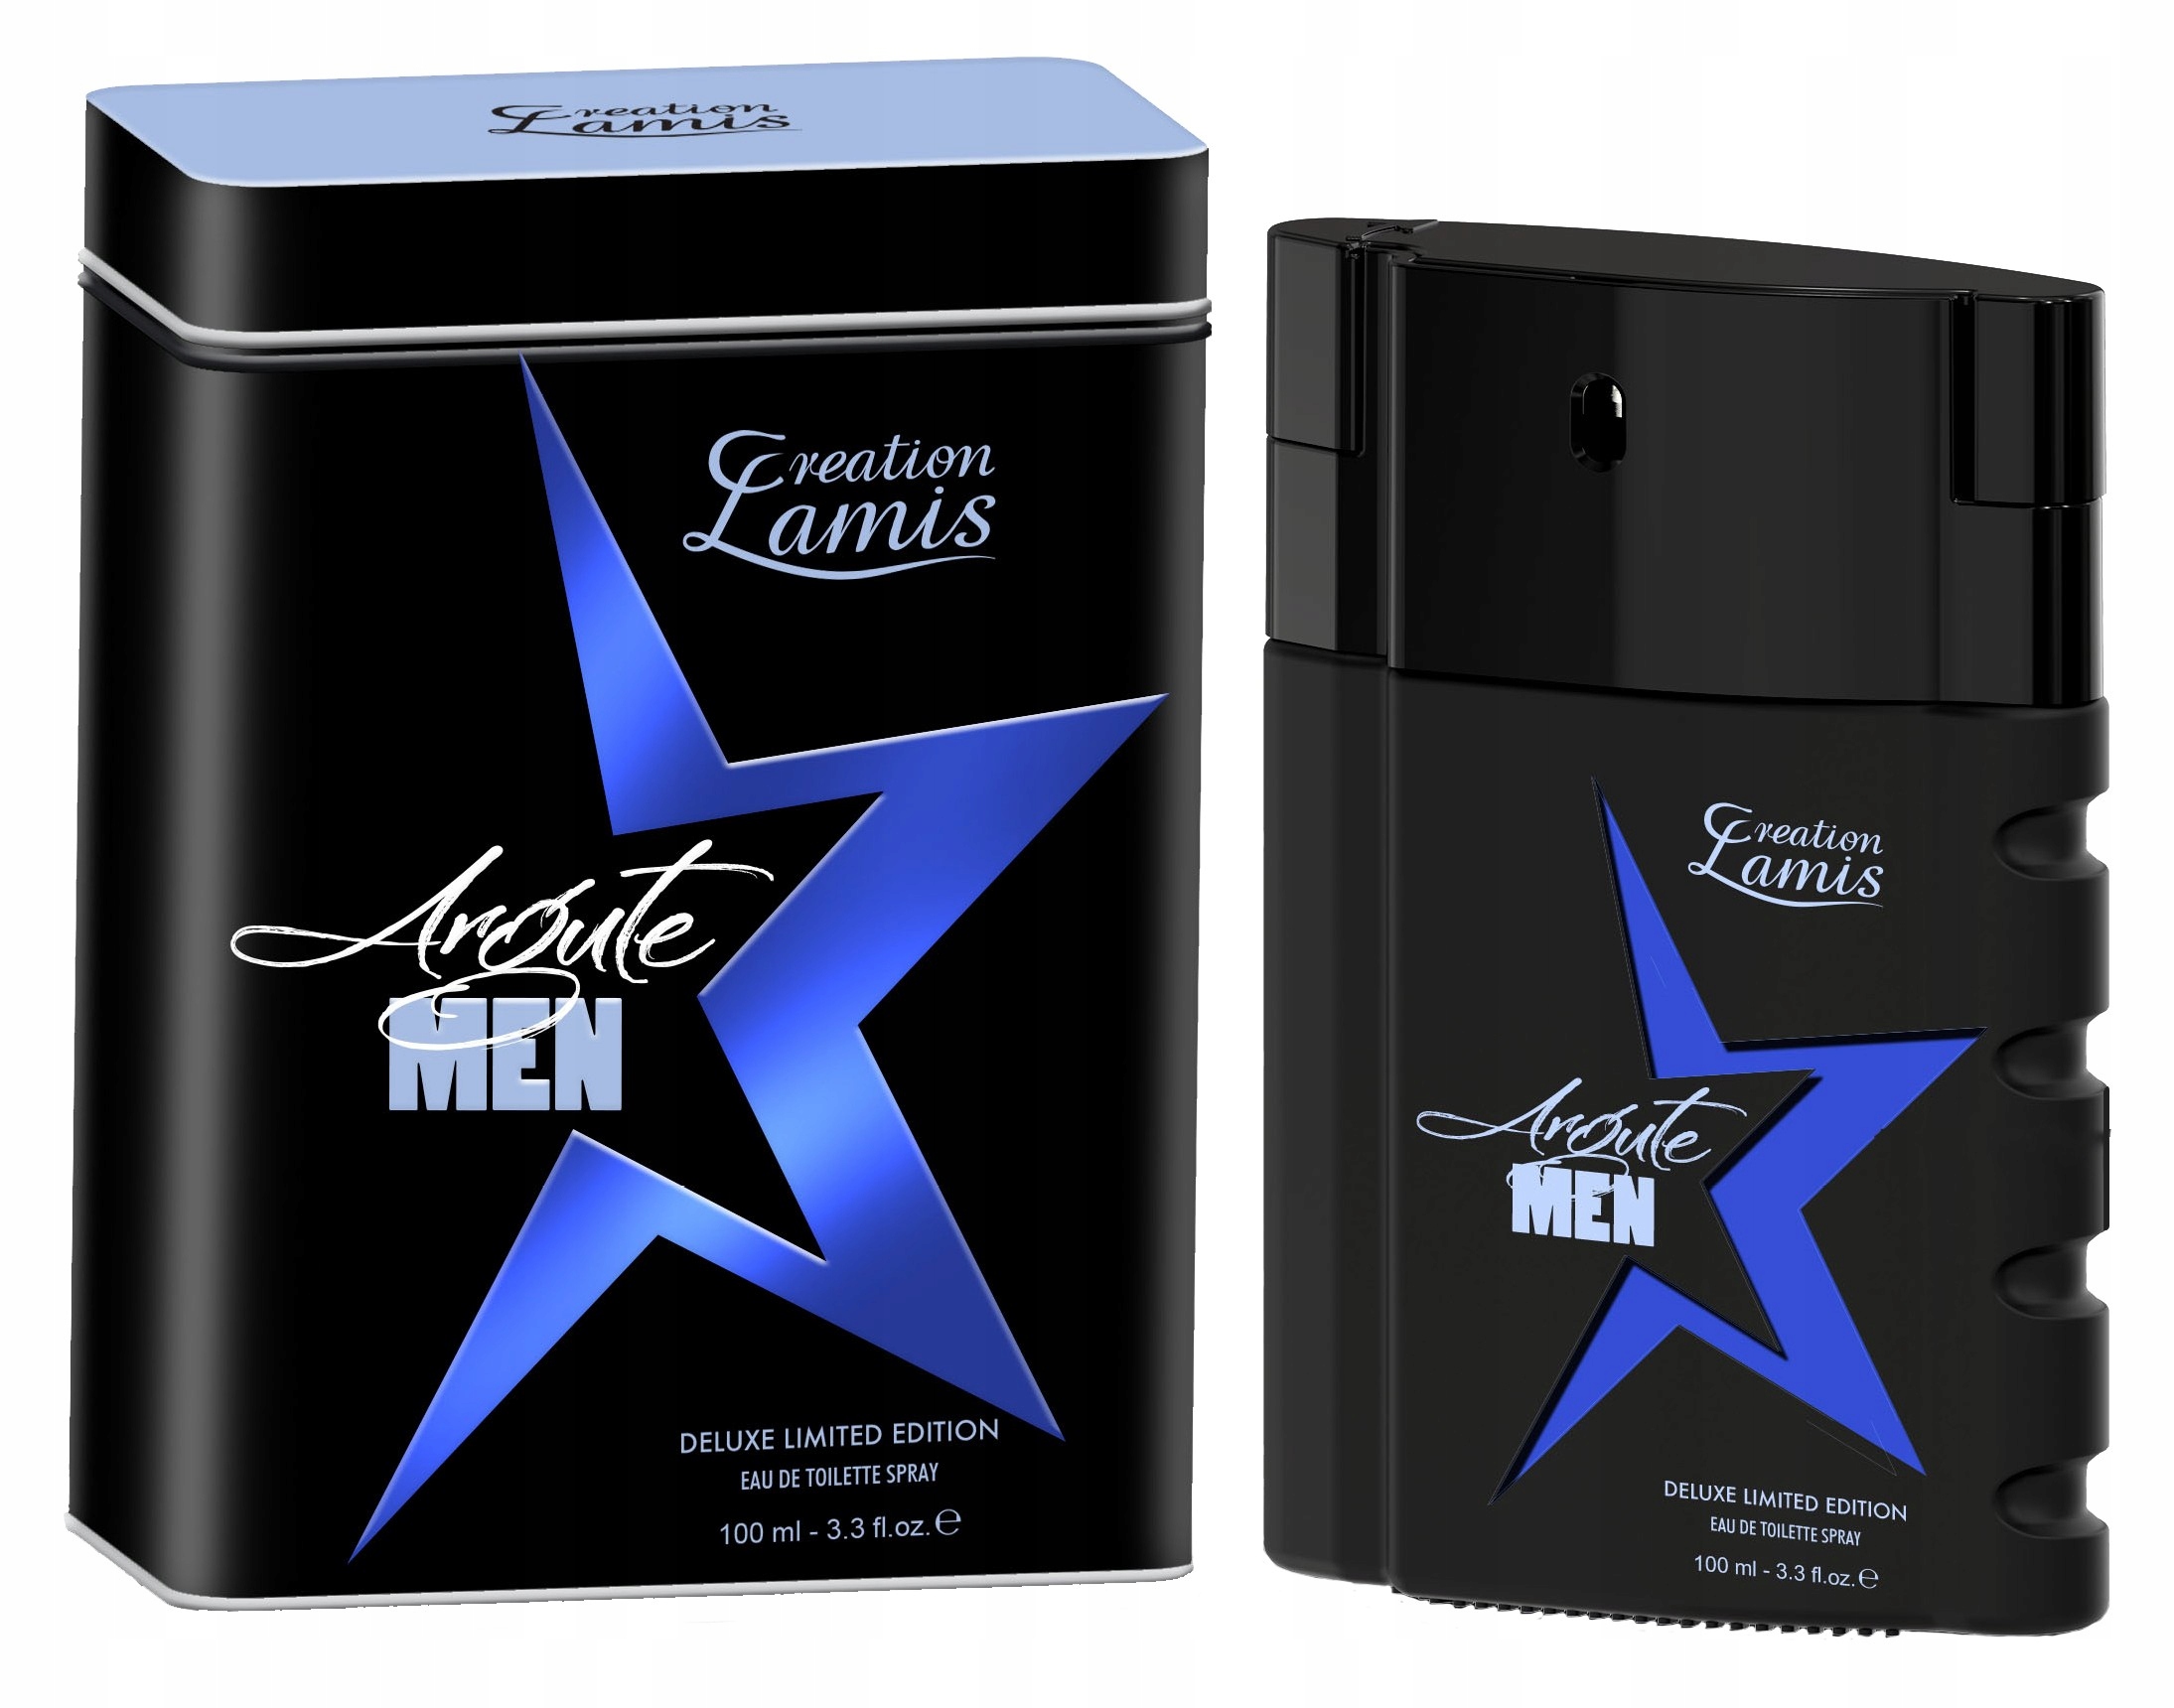 Artistic Men is Inspired by Thierry Mugler, A-MEN